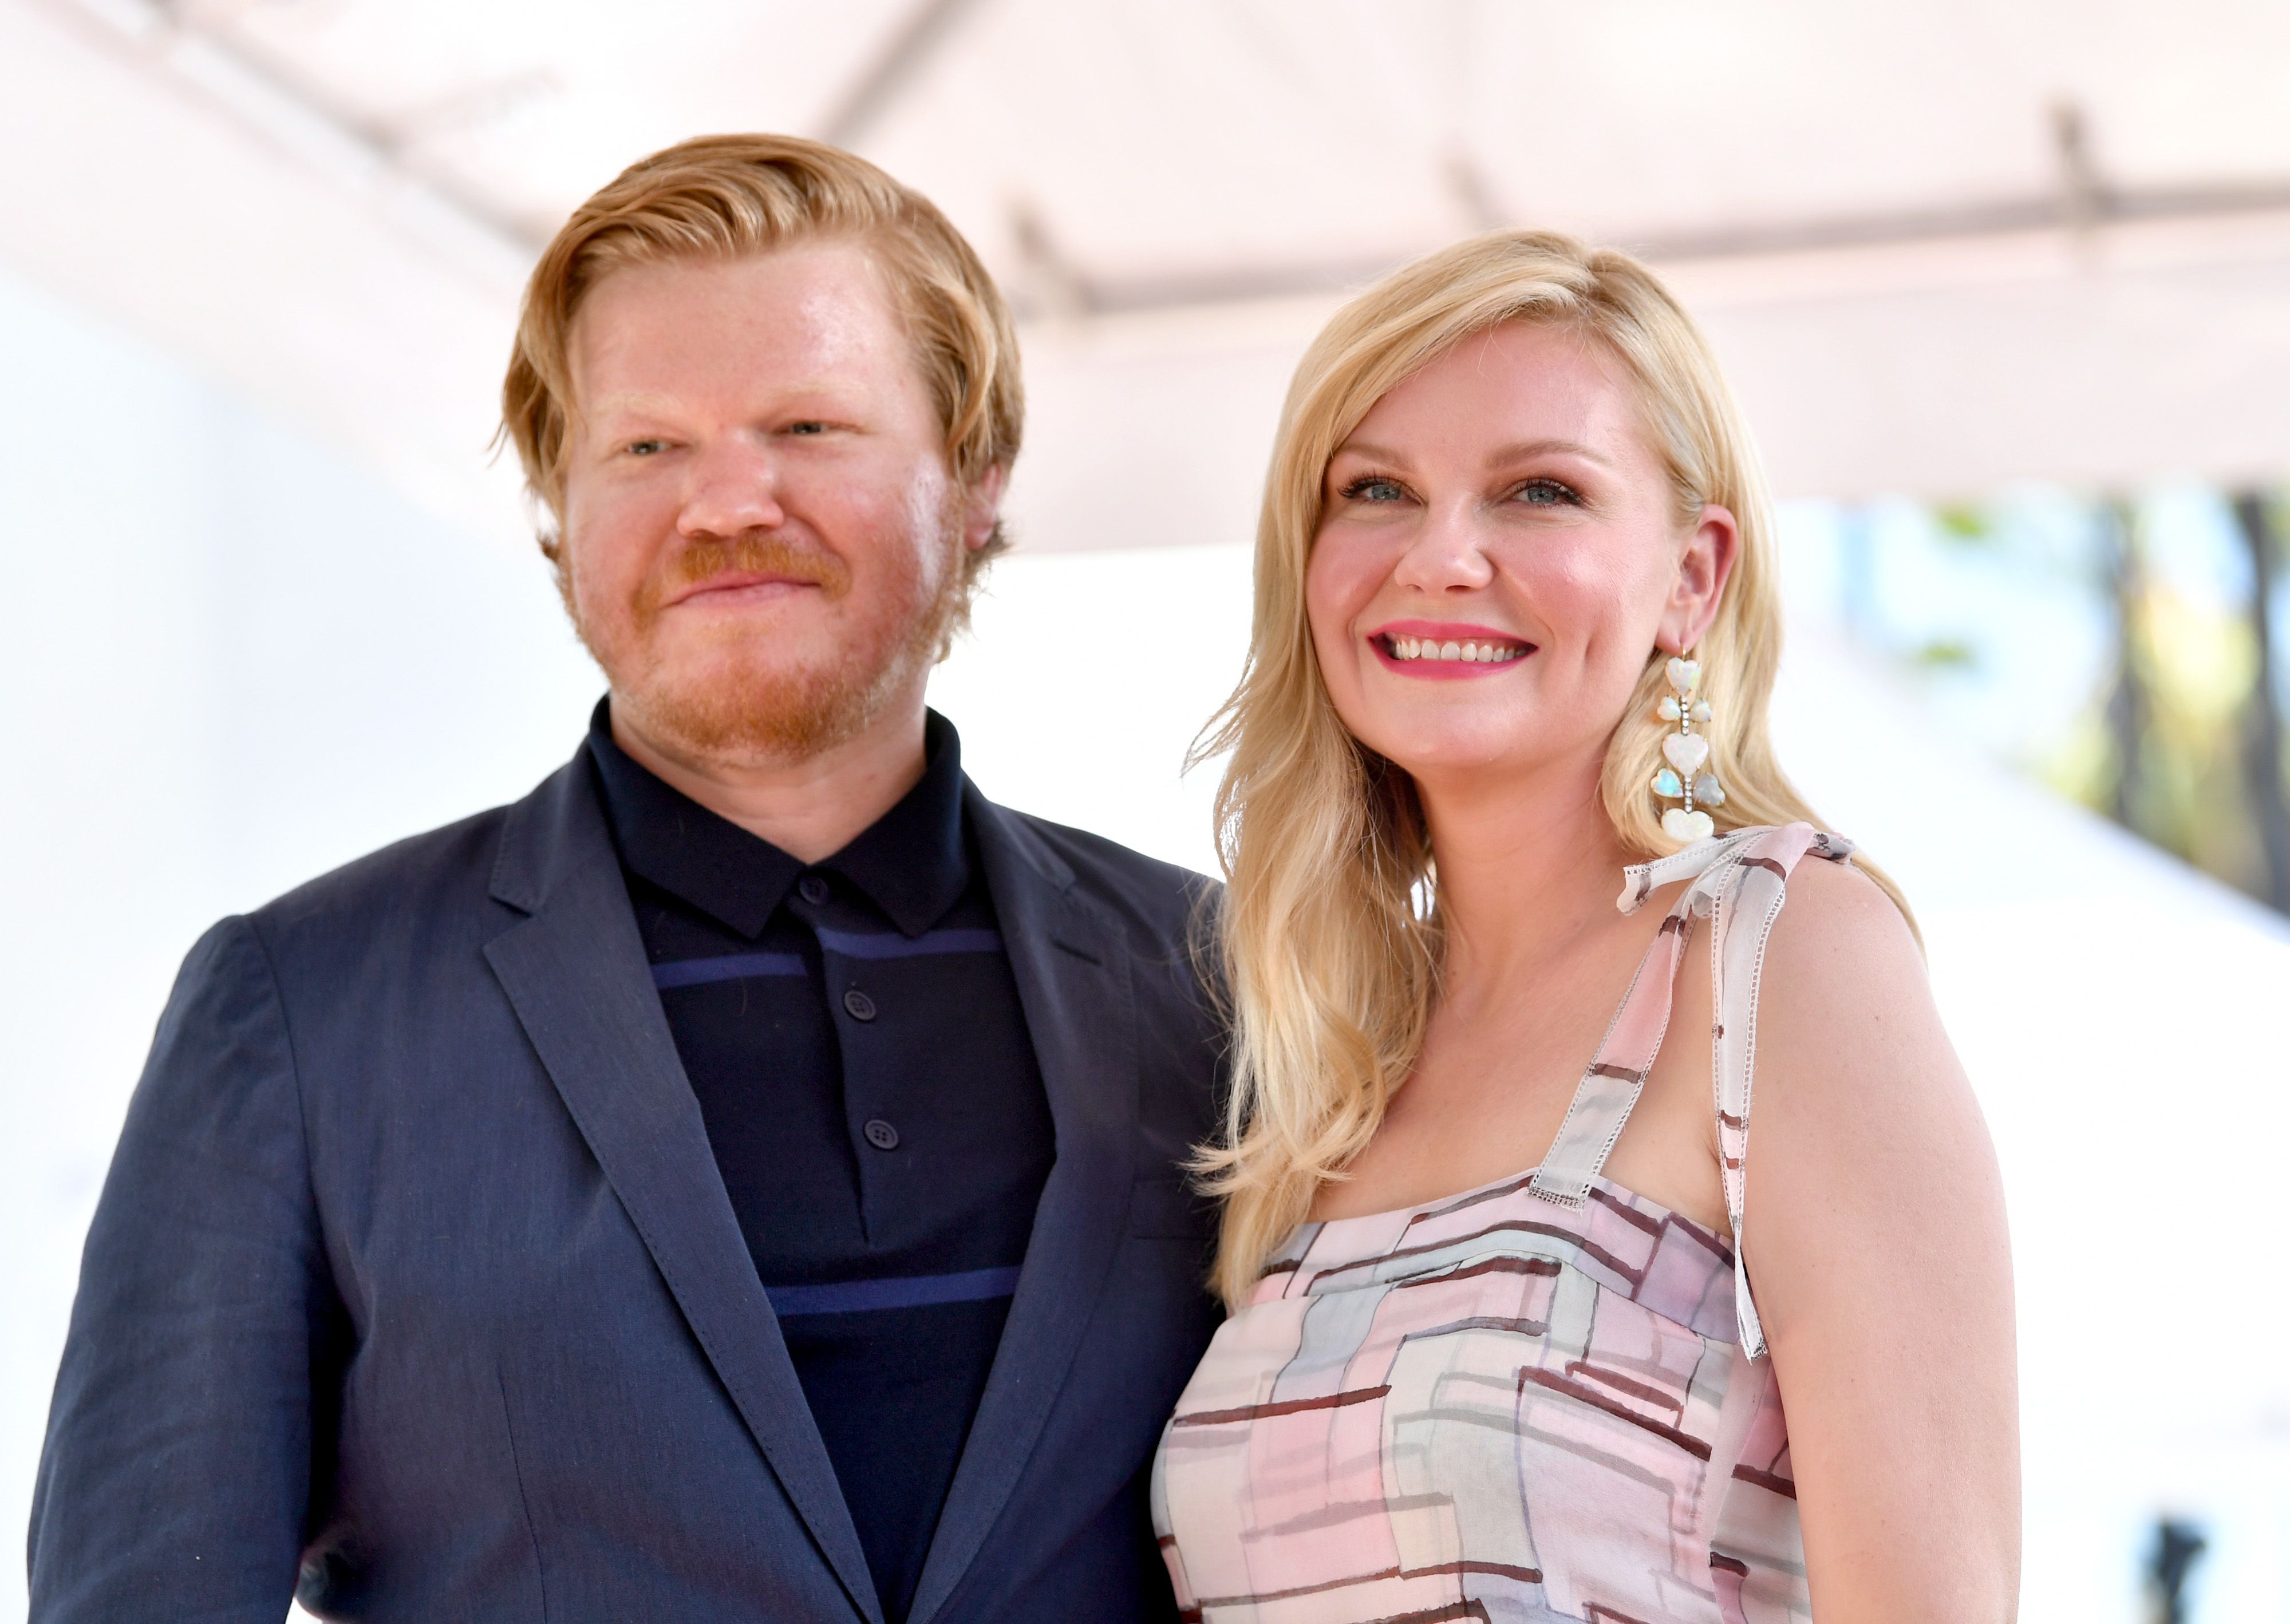 Jesse Plemons and Kirsten Dunst on the Hollywood Walk of Fame in 2019 in Hollywood, California | Source: Getty Images